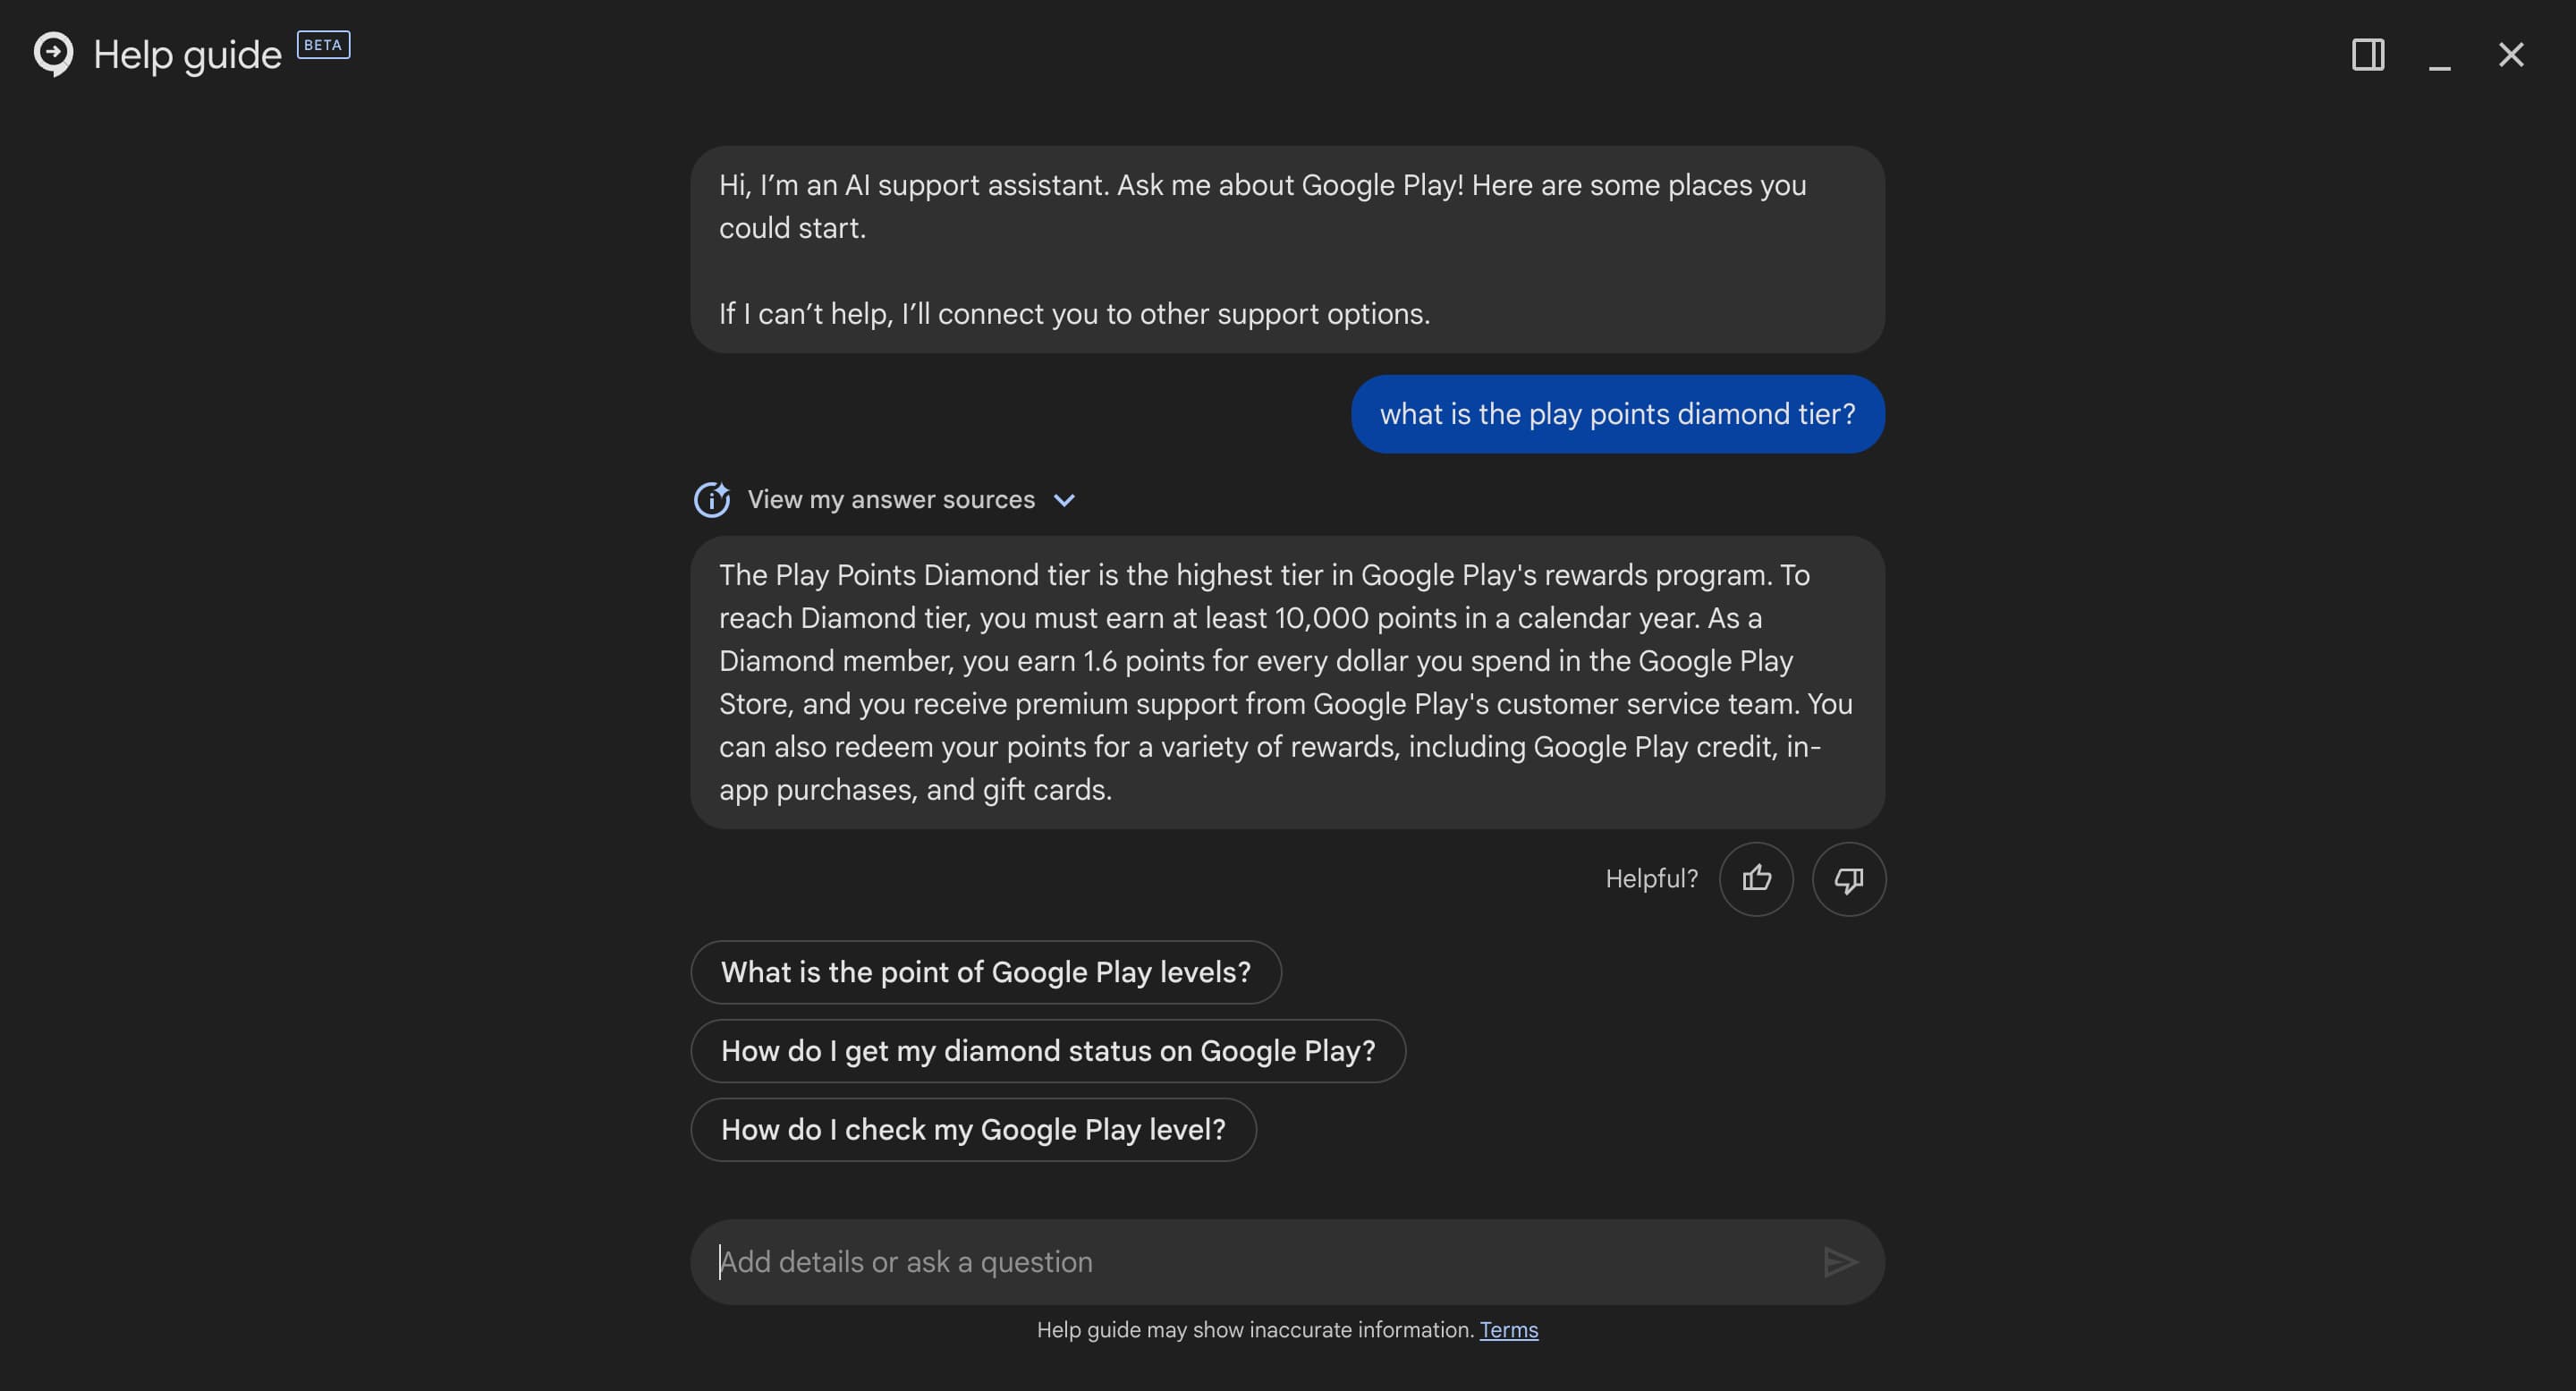 Google AI support assistant